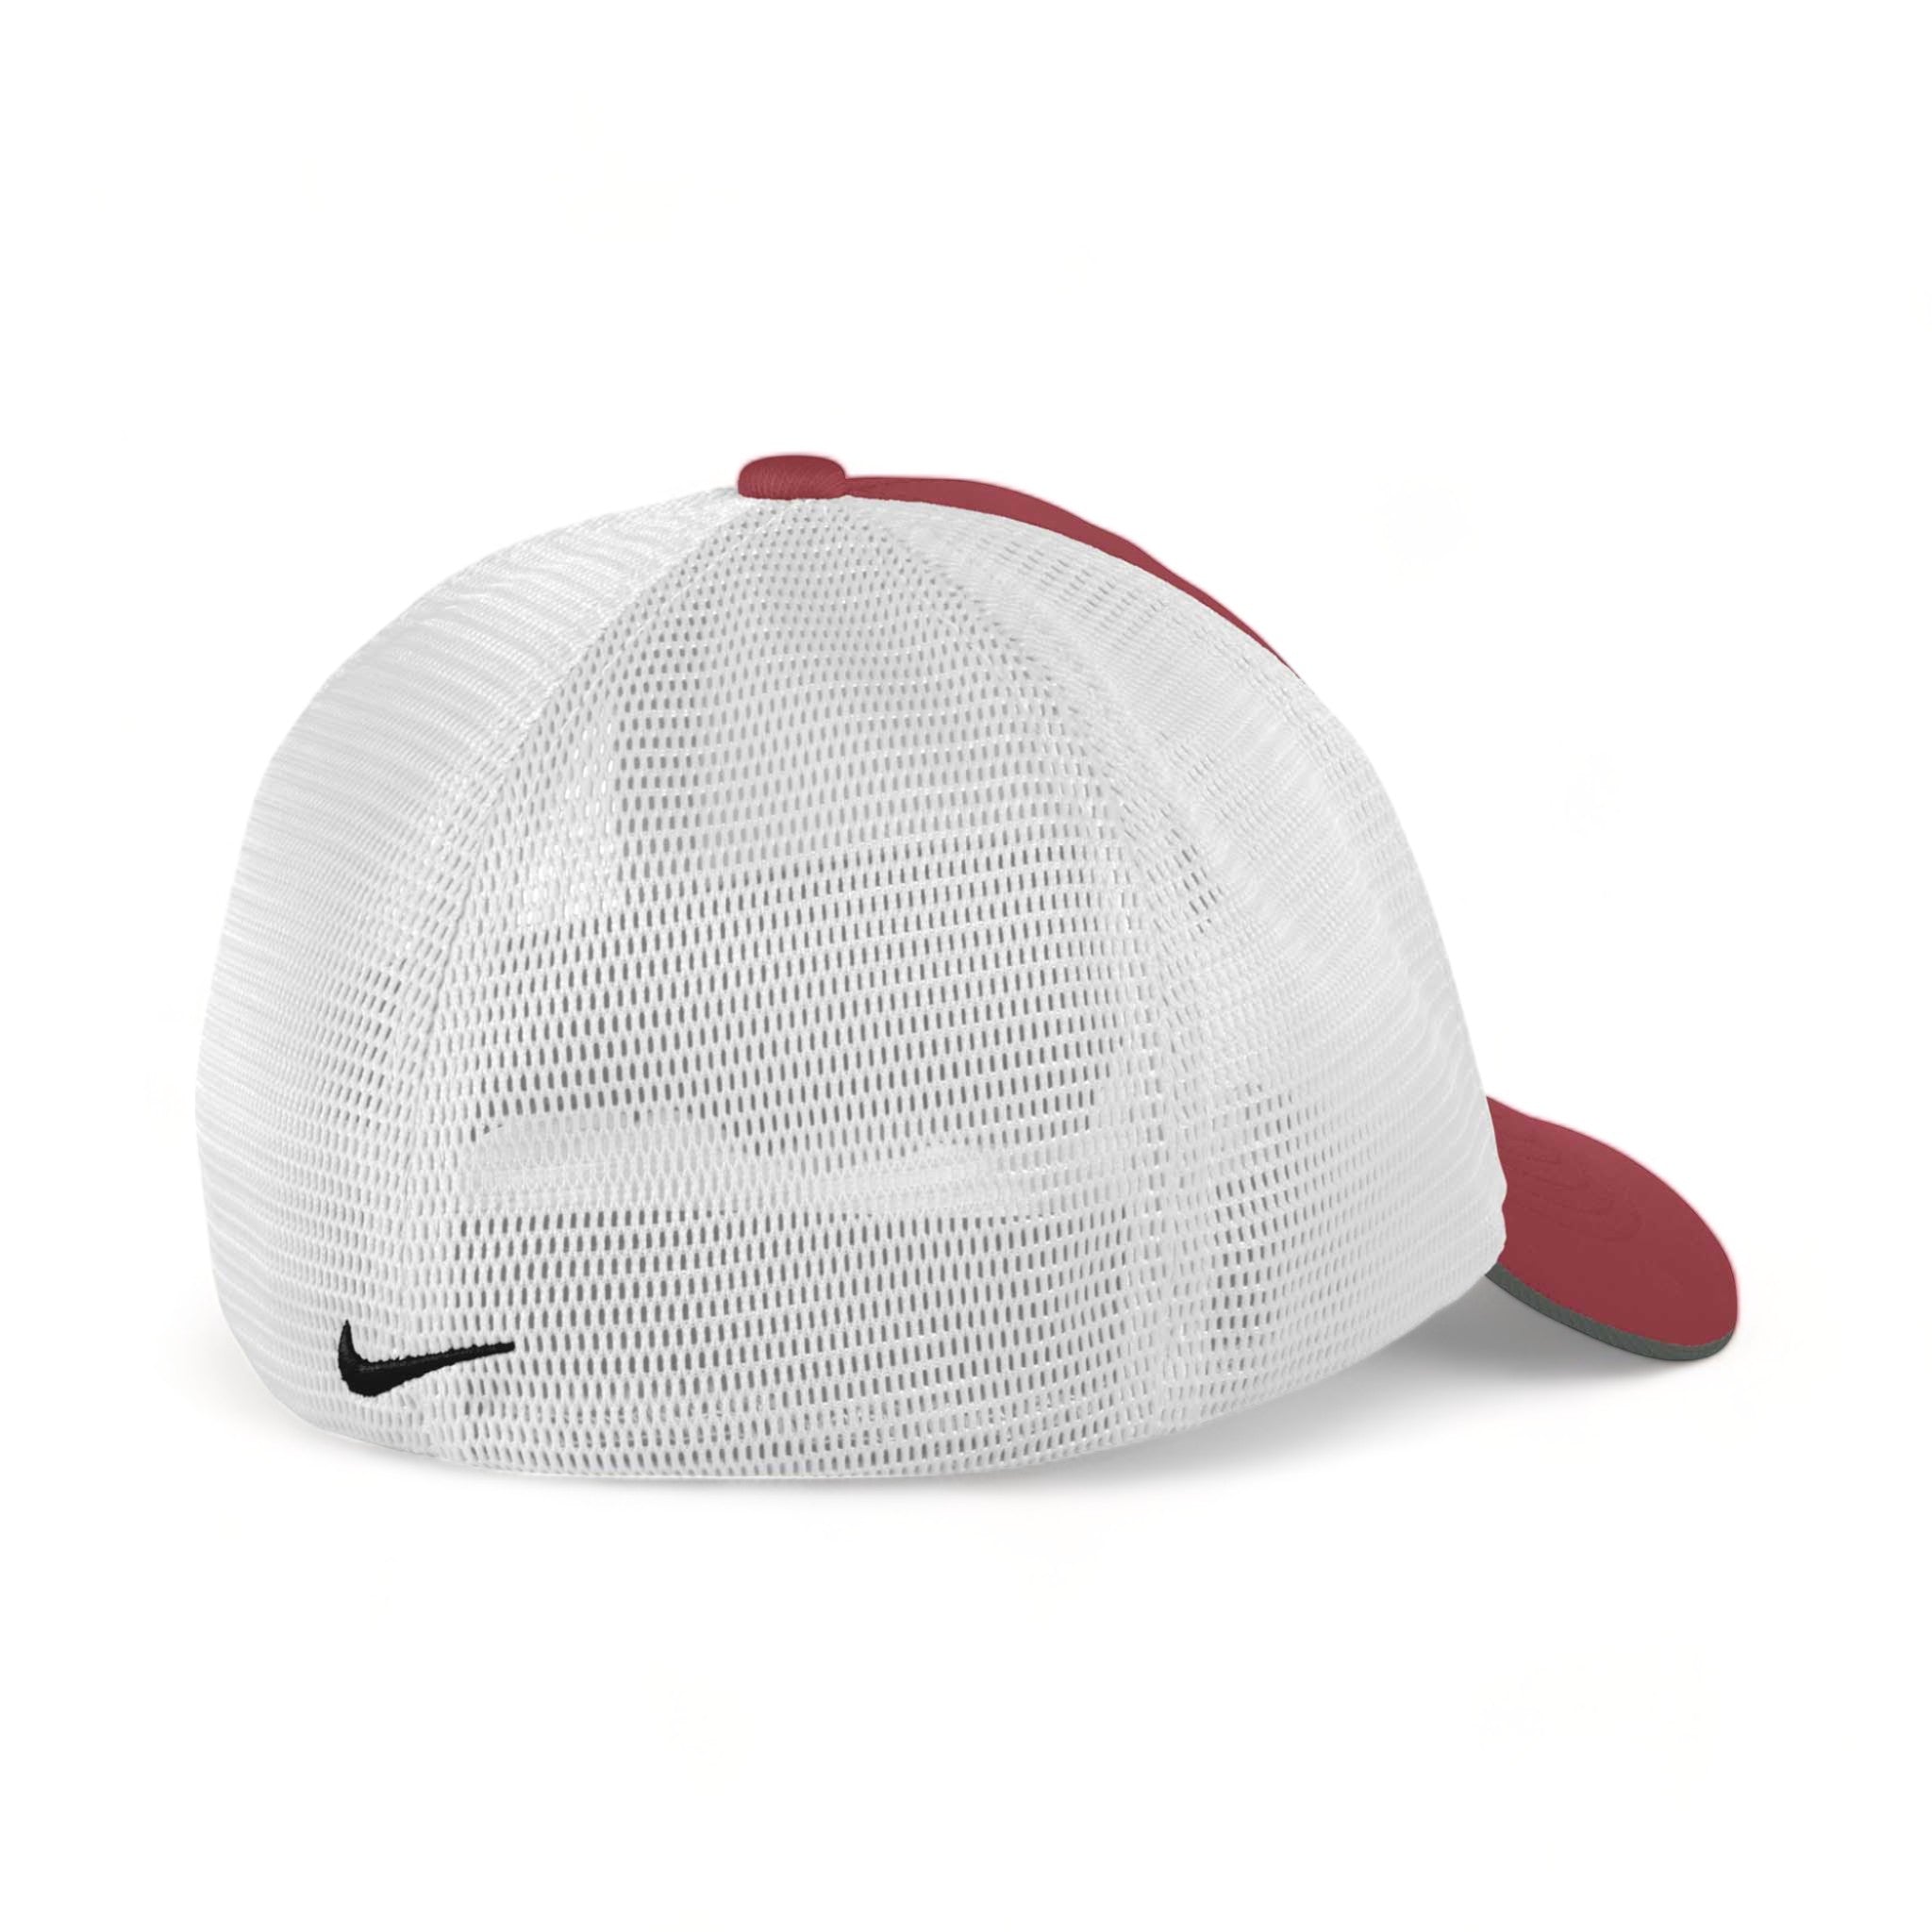 Back view of Nike NKFB6448 custom hat in team red and white